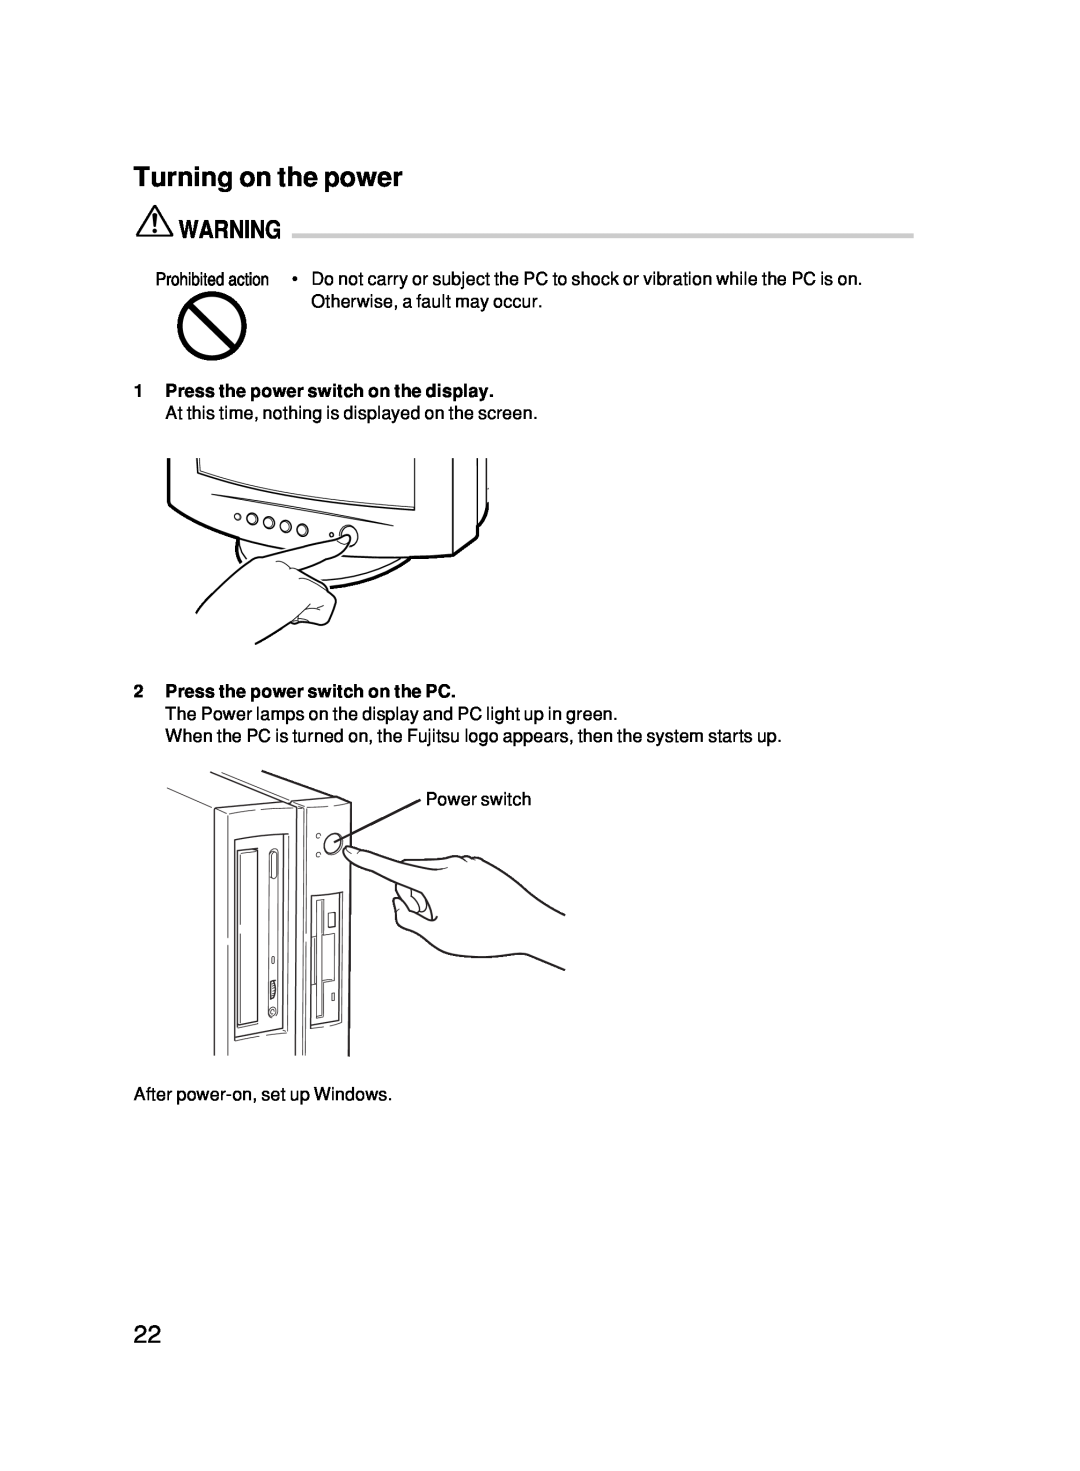 Fujitsu 500 user manual Turning on the power, Press the power switch on the display, Press the power switch on the PC 